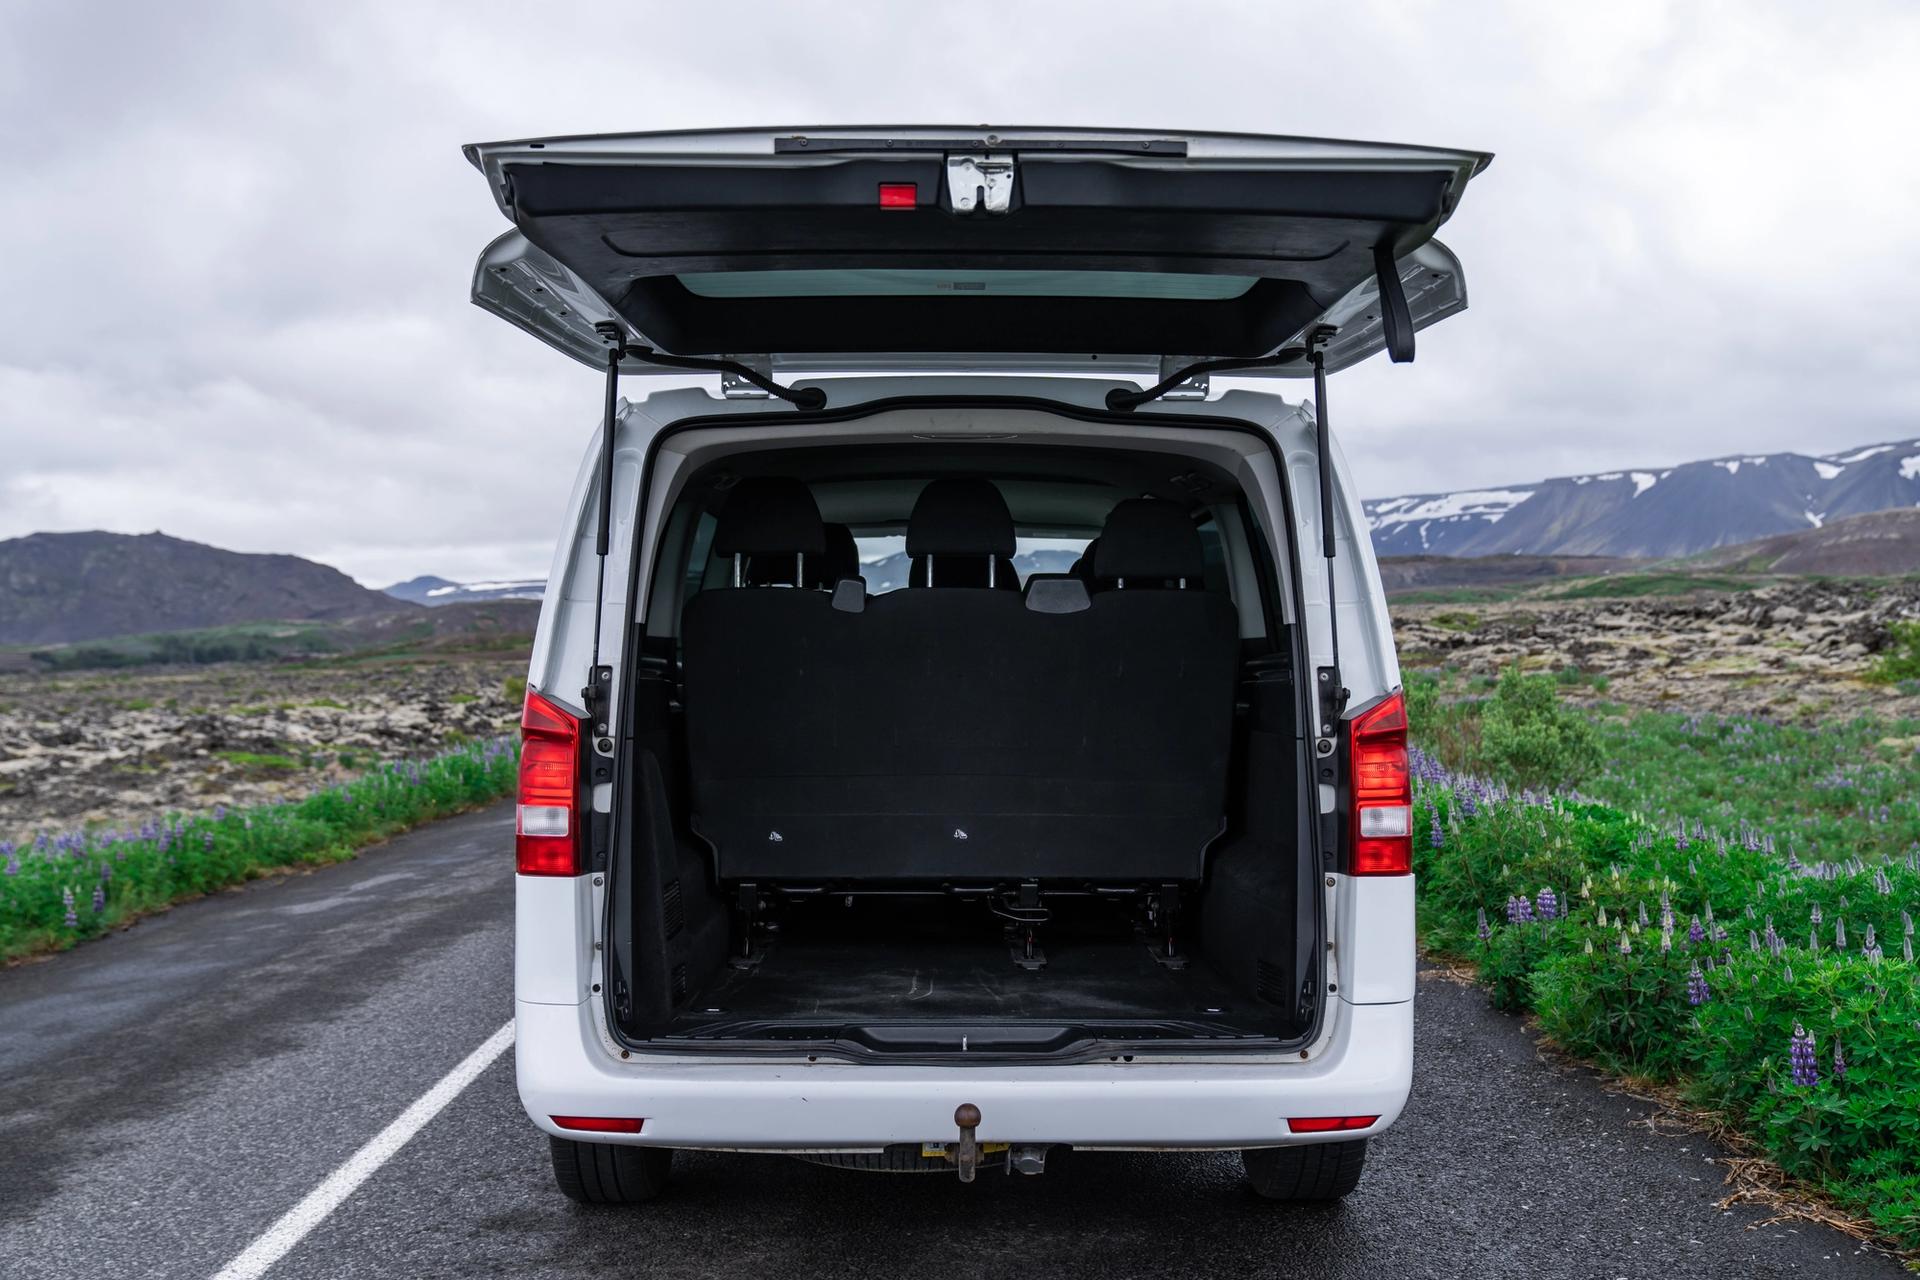 The spacious boot of a Mercedes Benz Vito, an ideal choice for car hire in Iceland, highlighting its abundant luggage capacity.